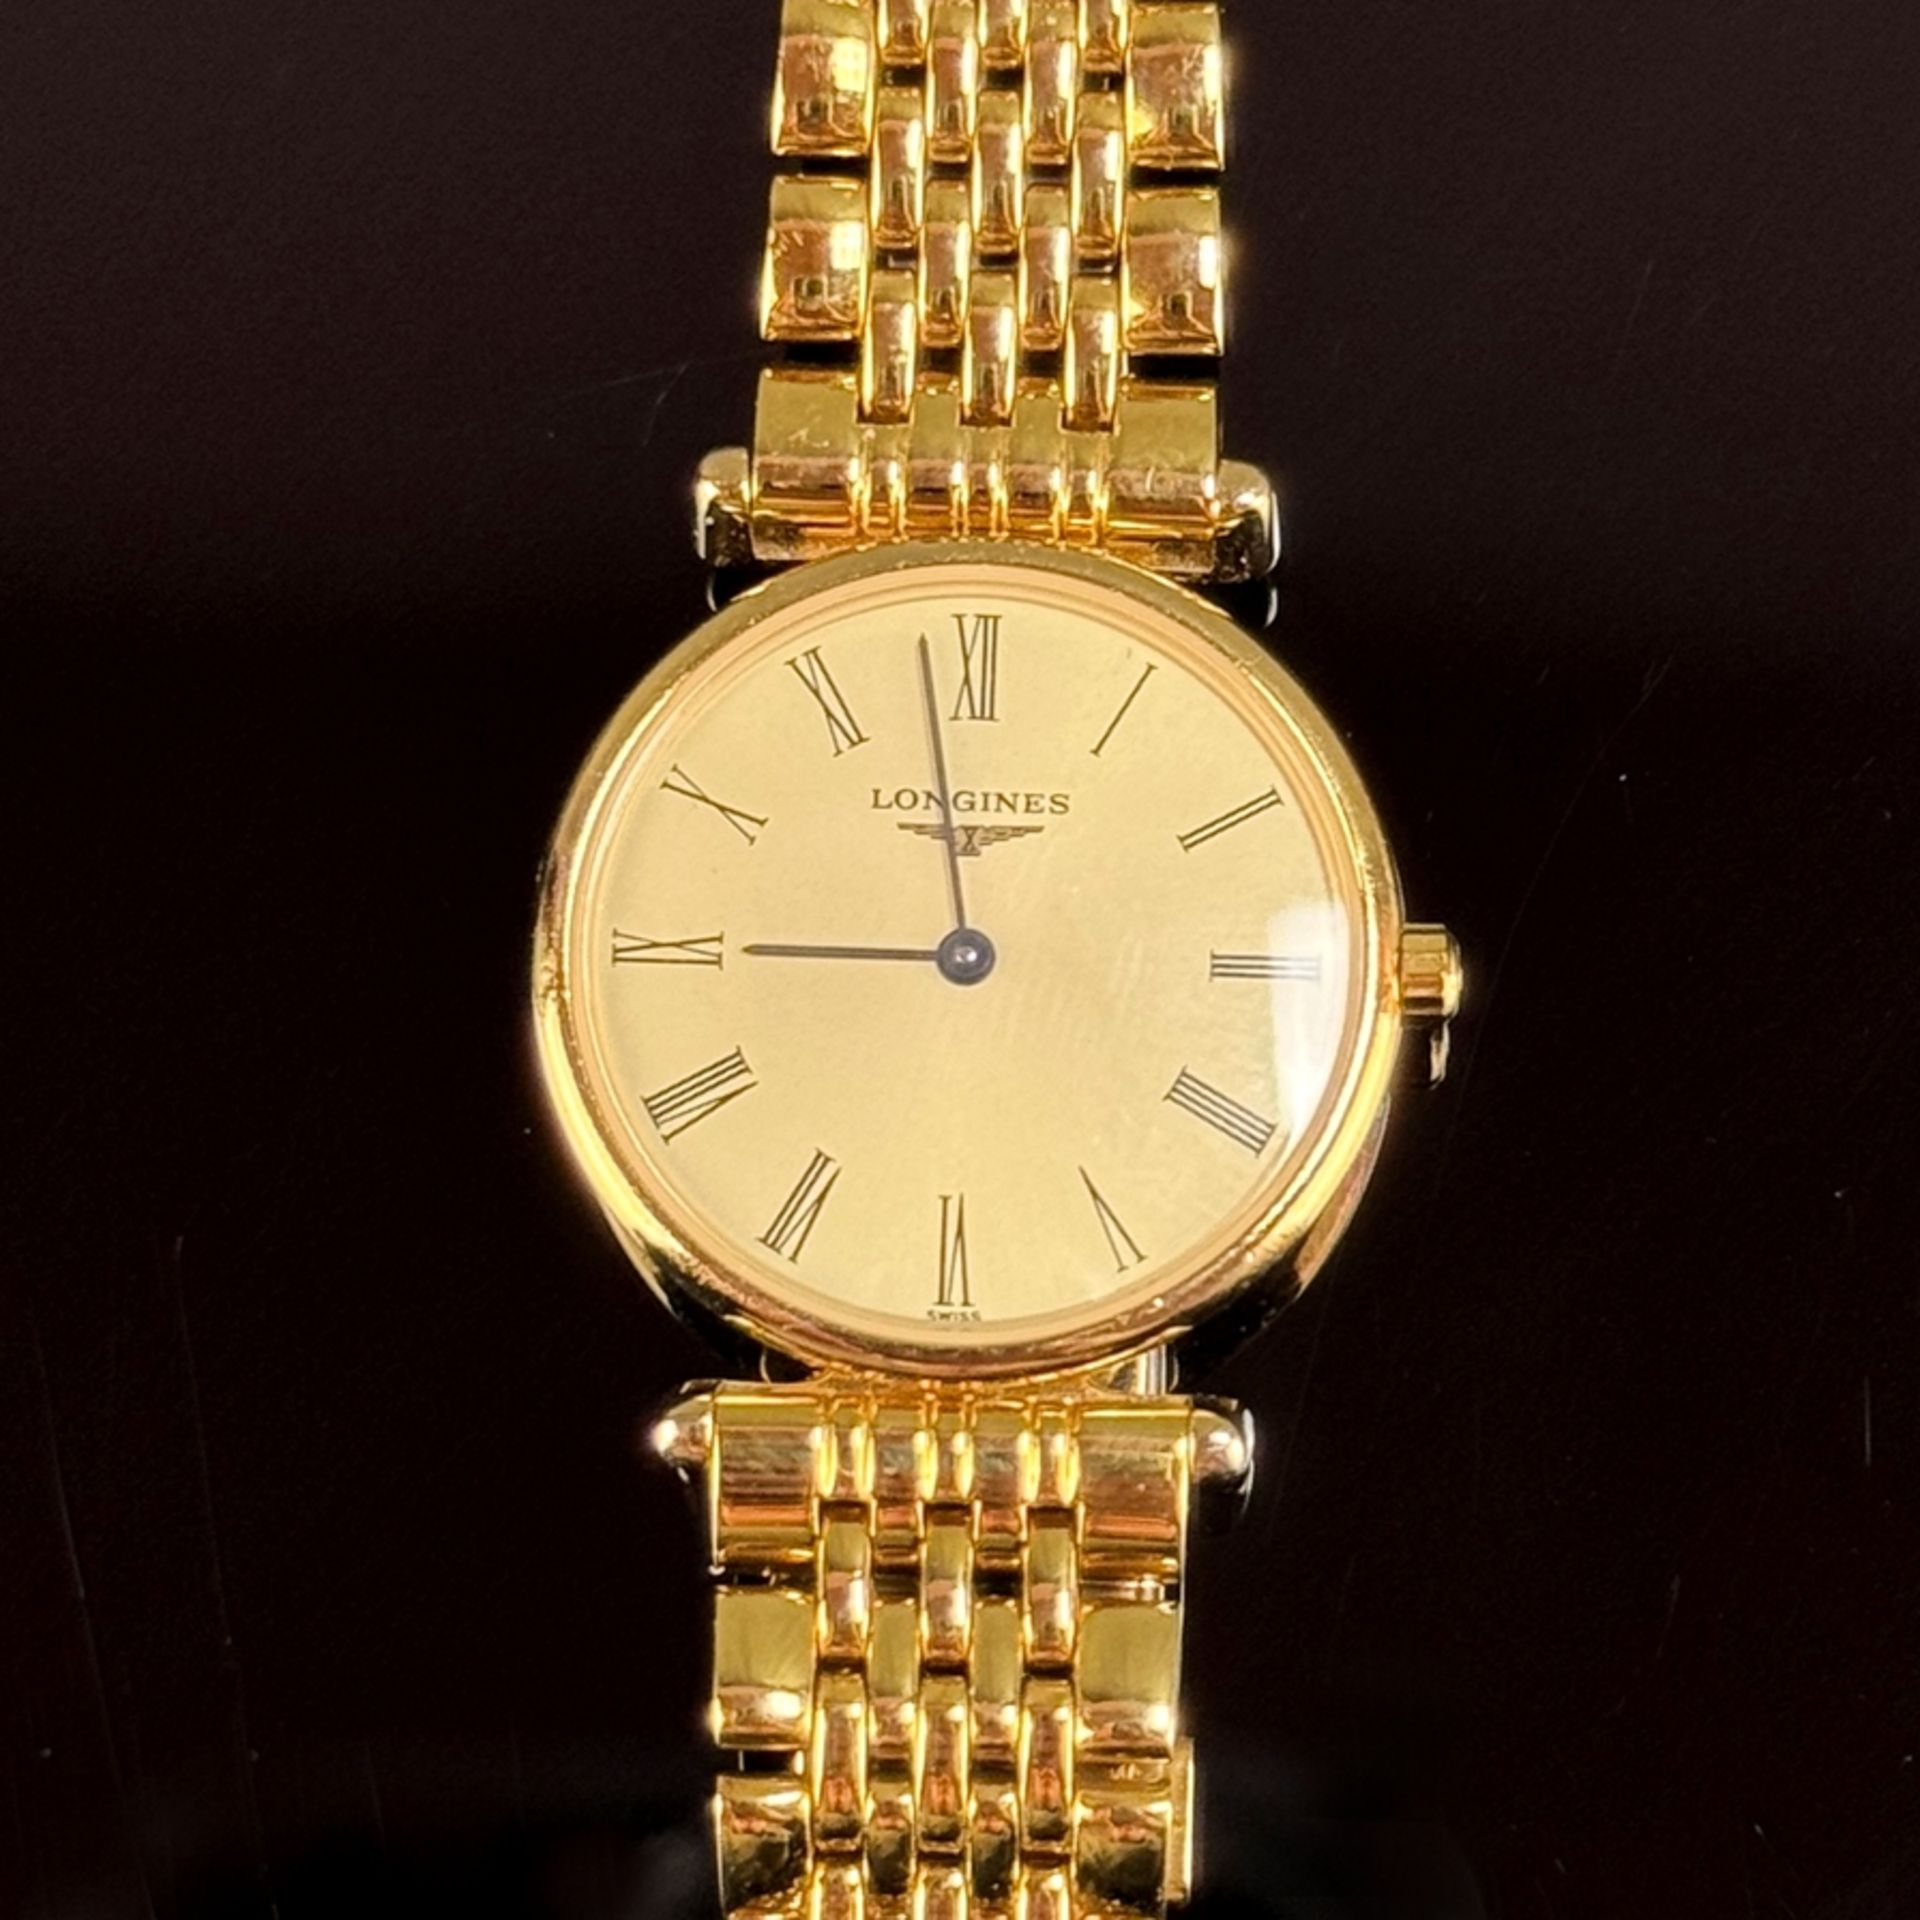 Wristwatch, Longines "La grande classique", gold-plated steel, reference L4.135.2, movement no. 287 - Image 2 of 3